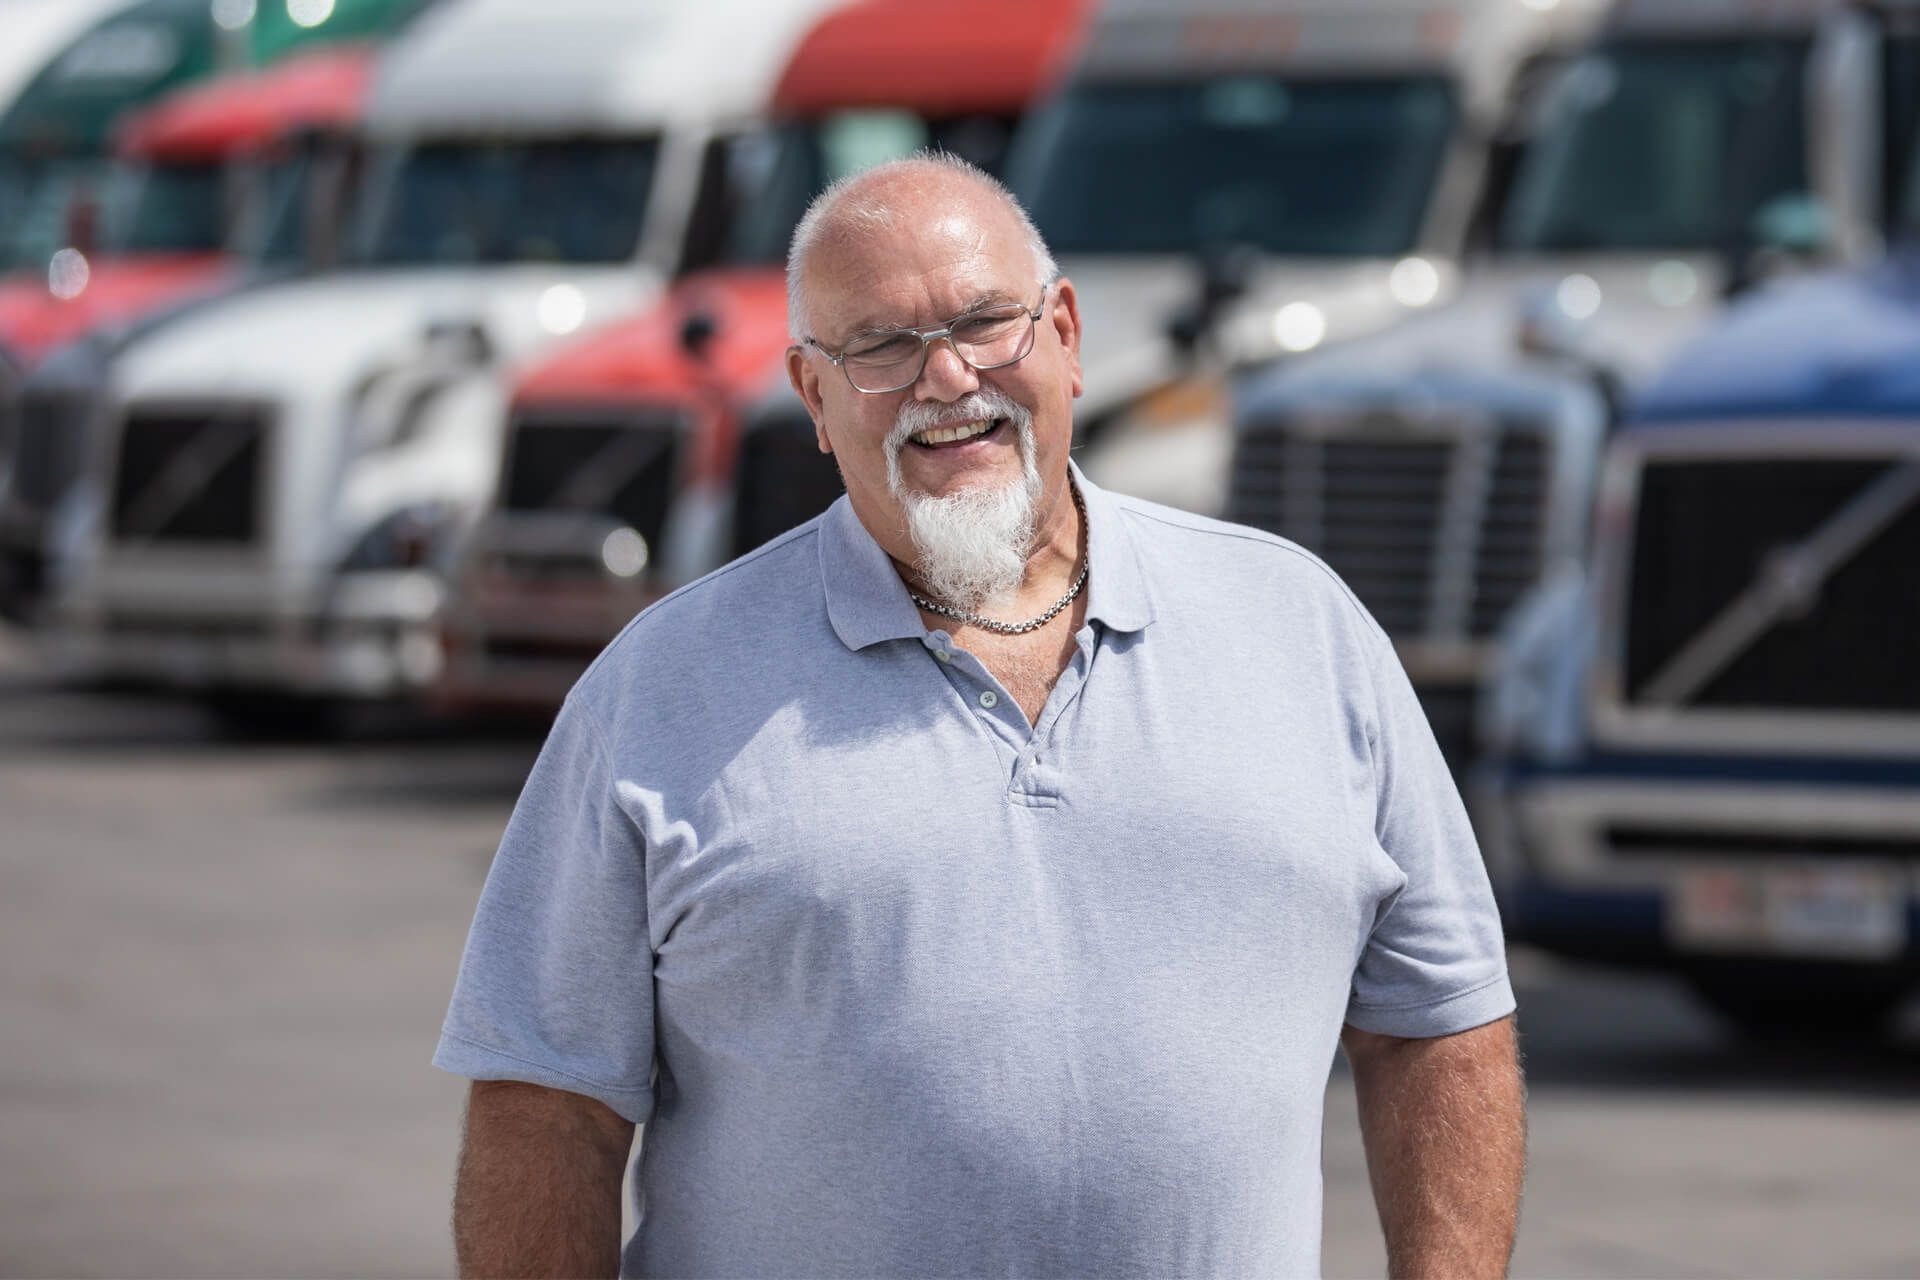 The Weigh-In: Fleet Owner Phil DeKnight on Managing Relationships